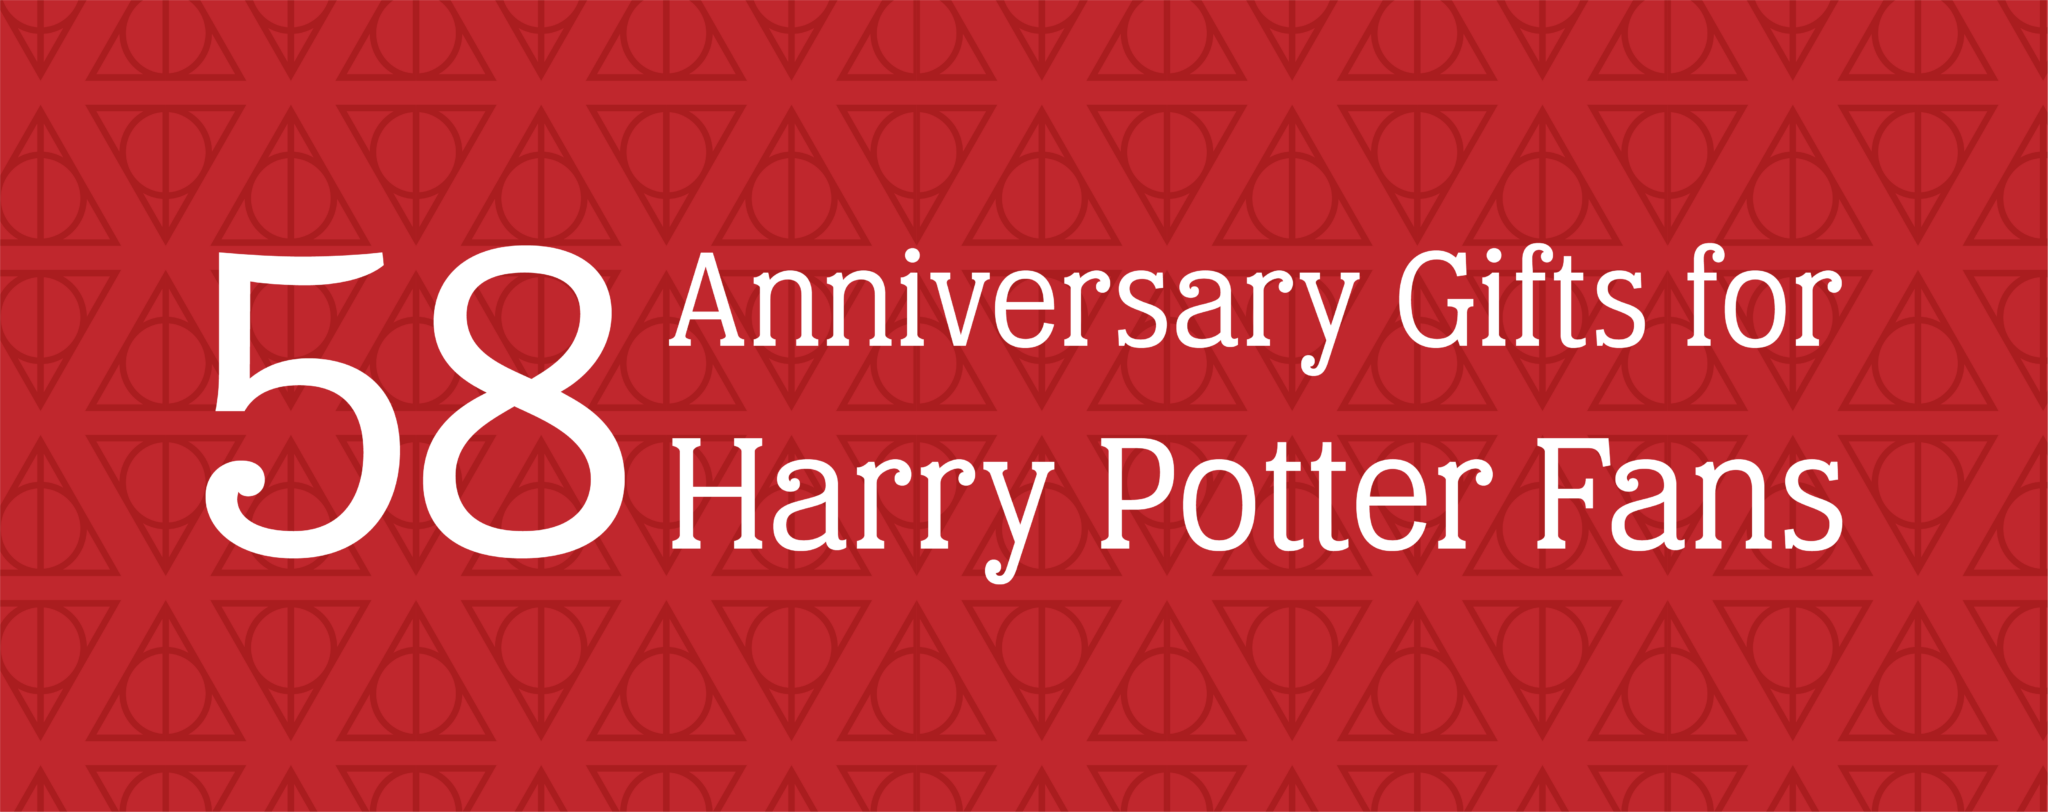 Gift Guide: 20 Gifts For Harry Potter Fans | MomsWhoSave.com